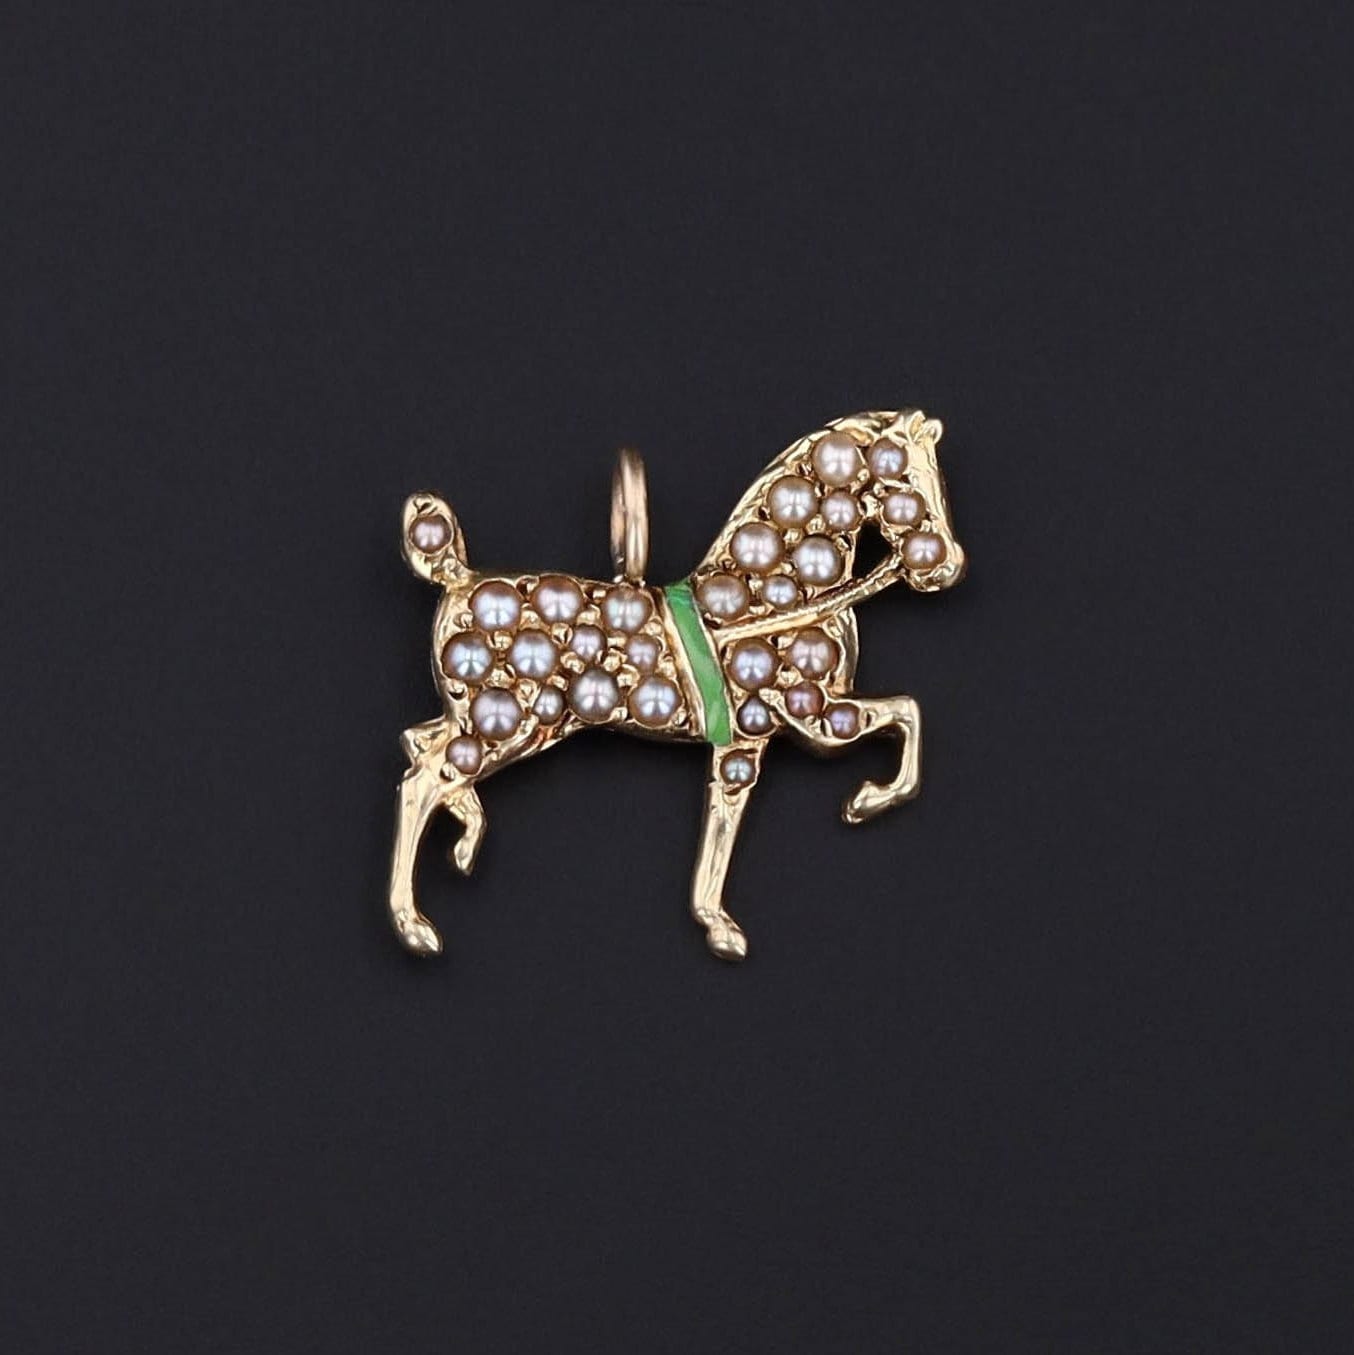 Antique Pearl and Enamel Horse Pendant: Experience the allure of antiquity with this 14k gold horse pendant, adorned with tiny half pearls and striking green enamel. Dating back to circa 1915.